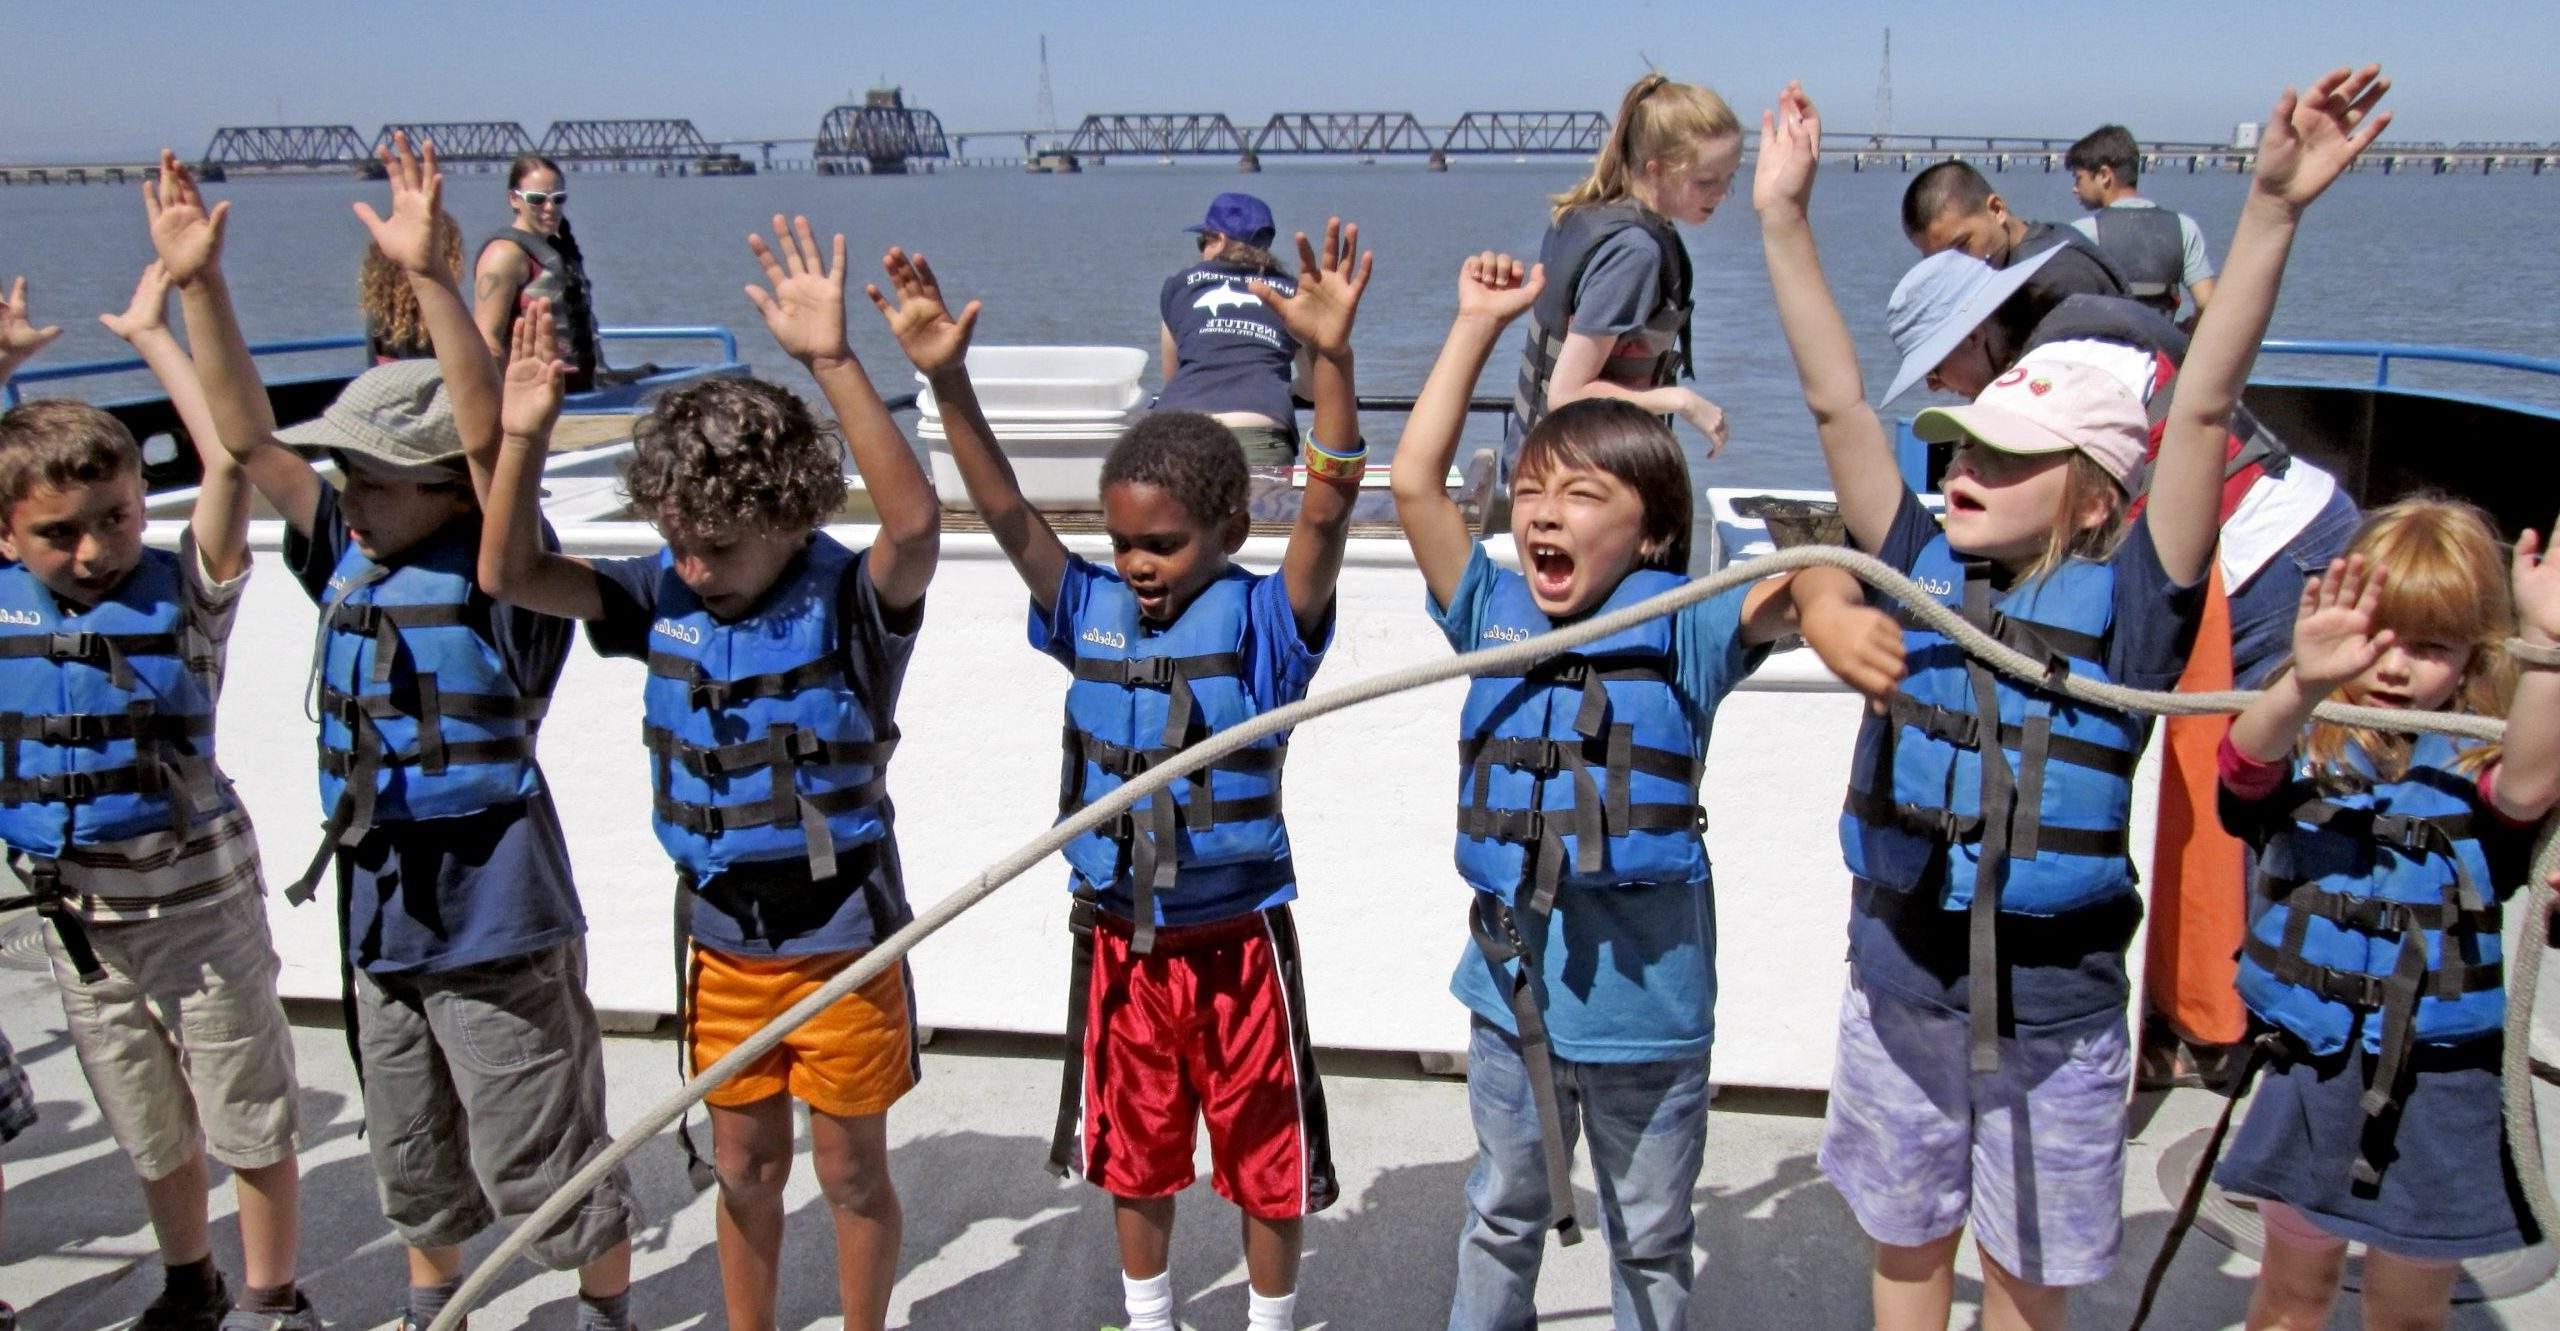 Children wearing blue life vests raise their arms on the deck of a boat.